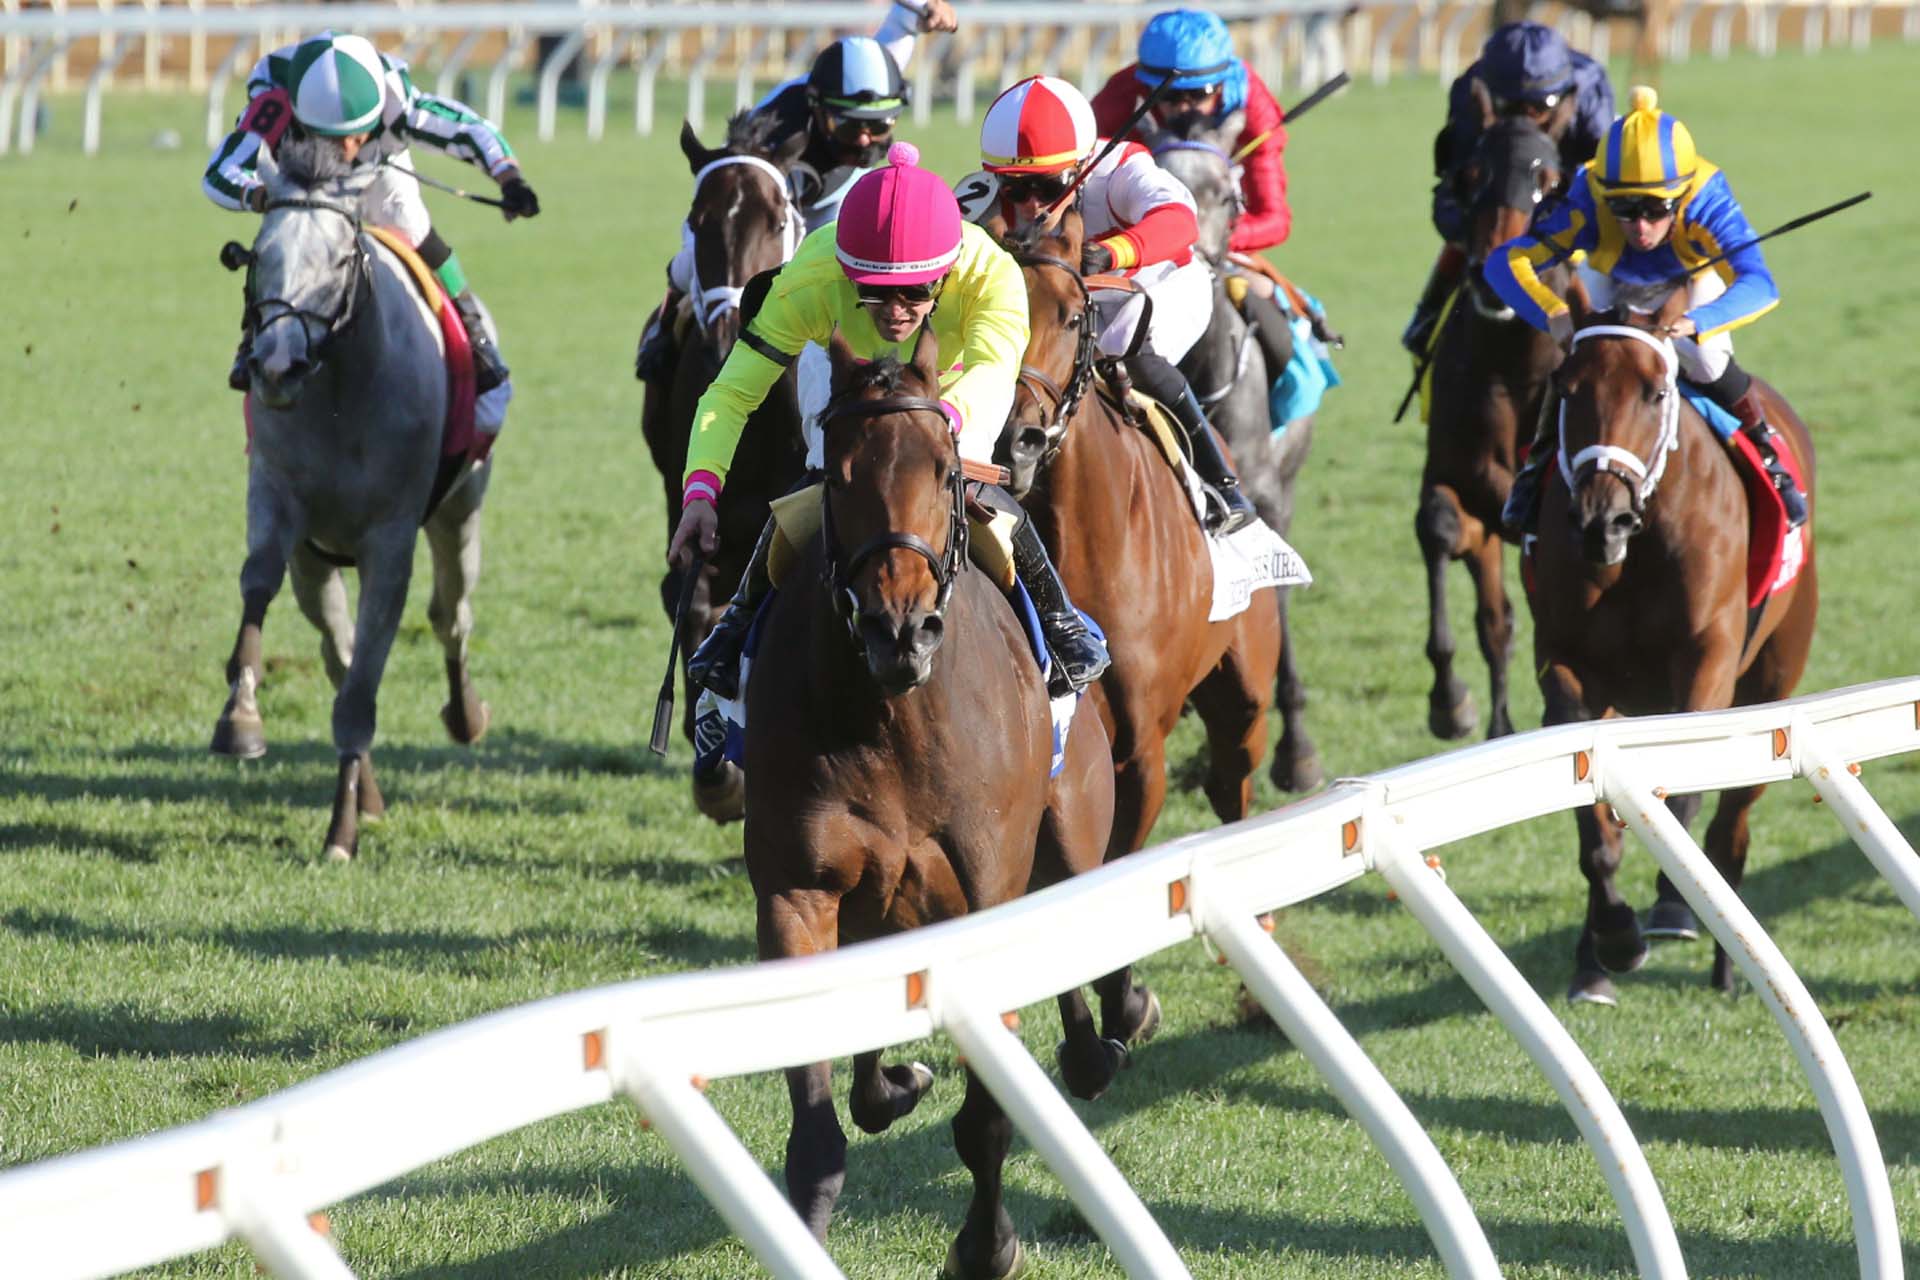 An action shot of jockeys riding their horses mid race. A jockey in a neon yellow shirt and pink hat riding a chestnut brown horse is in the lead.